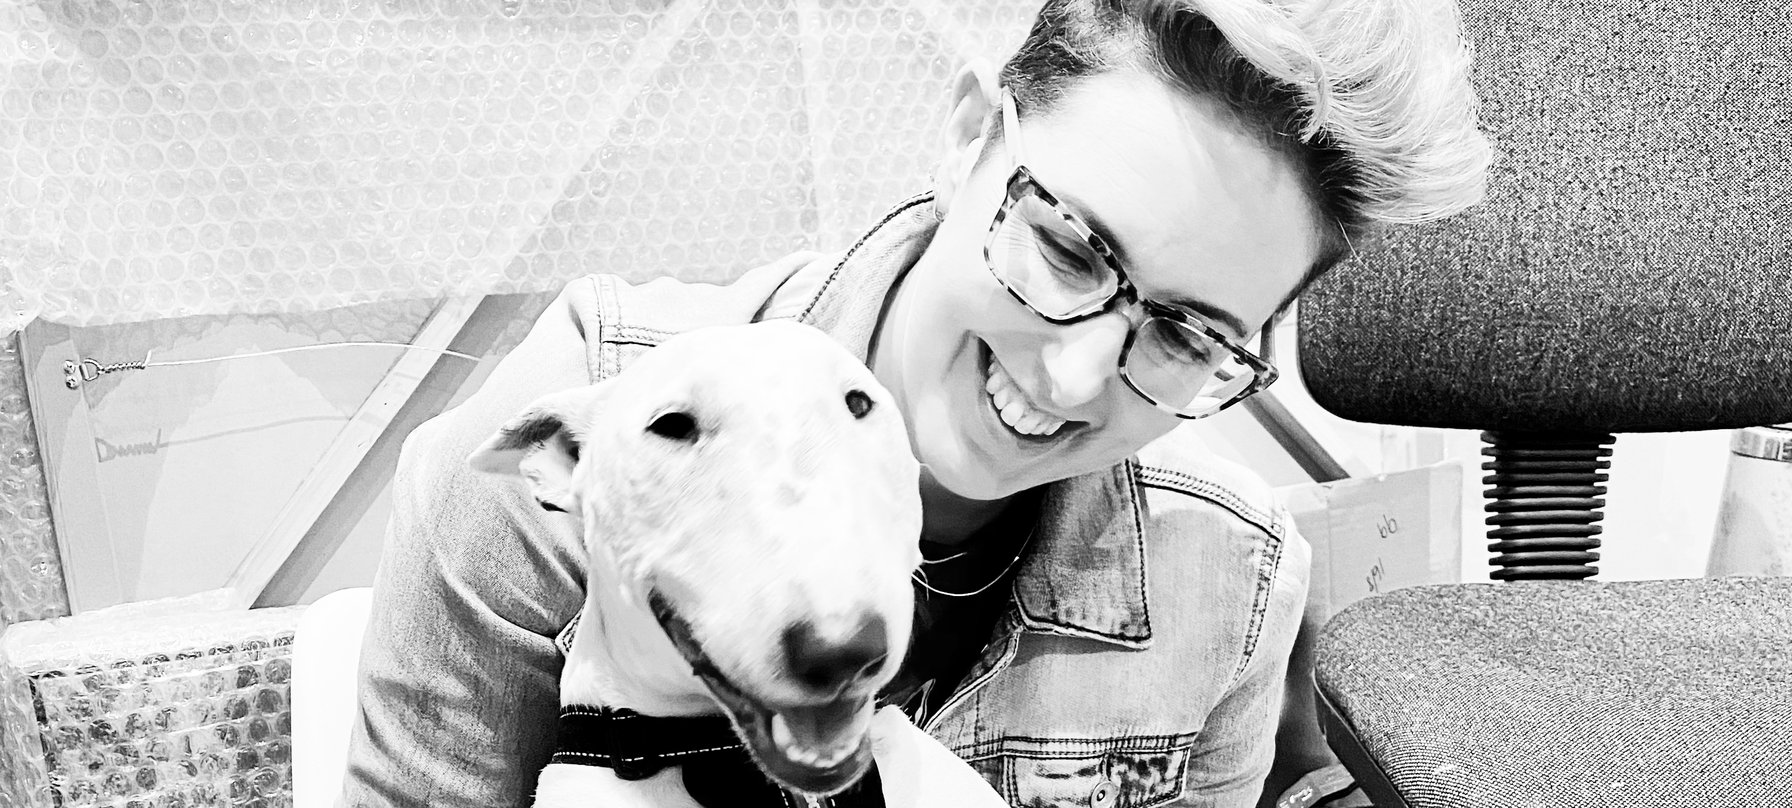 A black and white photo of Nicole Hutchins holding a bull terrier dog. Both appear to be smiling. Nicole has pale skin, wears wide-framed tortoise shell glasses and has short hair in a quiff atop their head. Credit Nicole Hutchins.